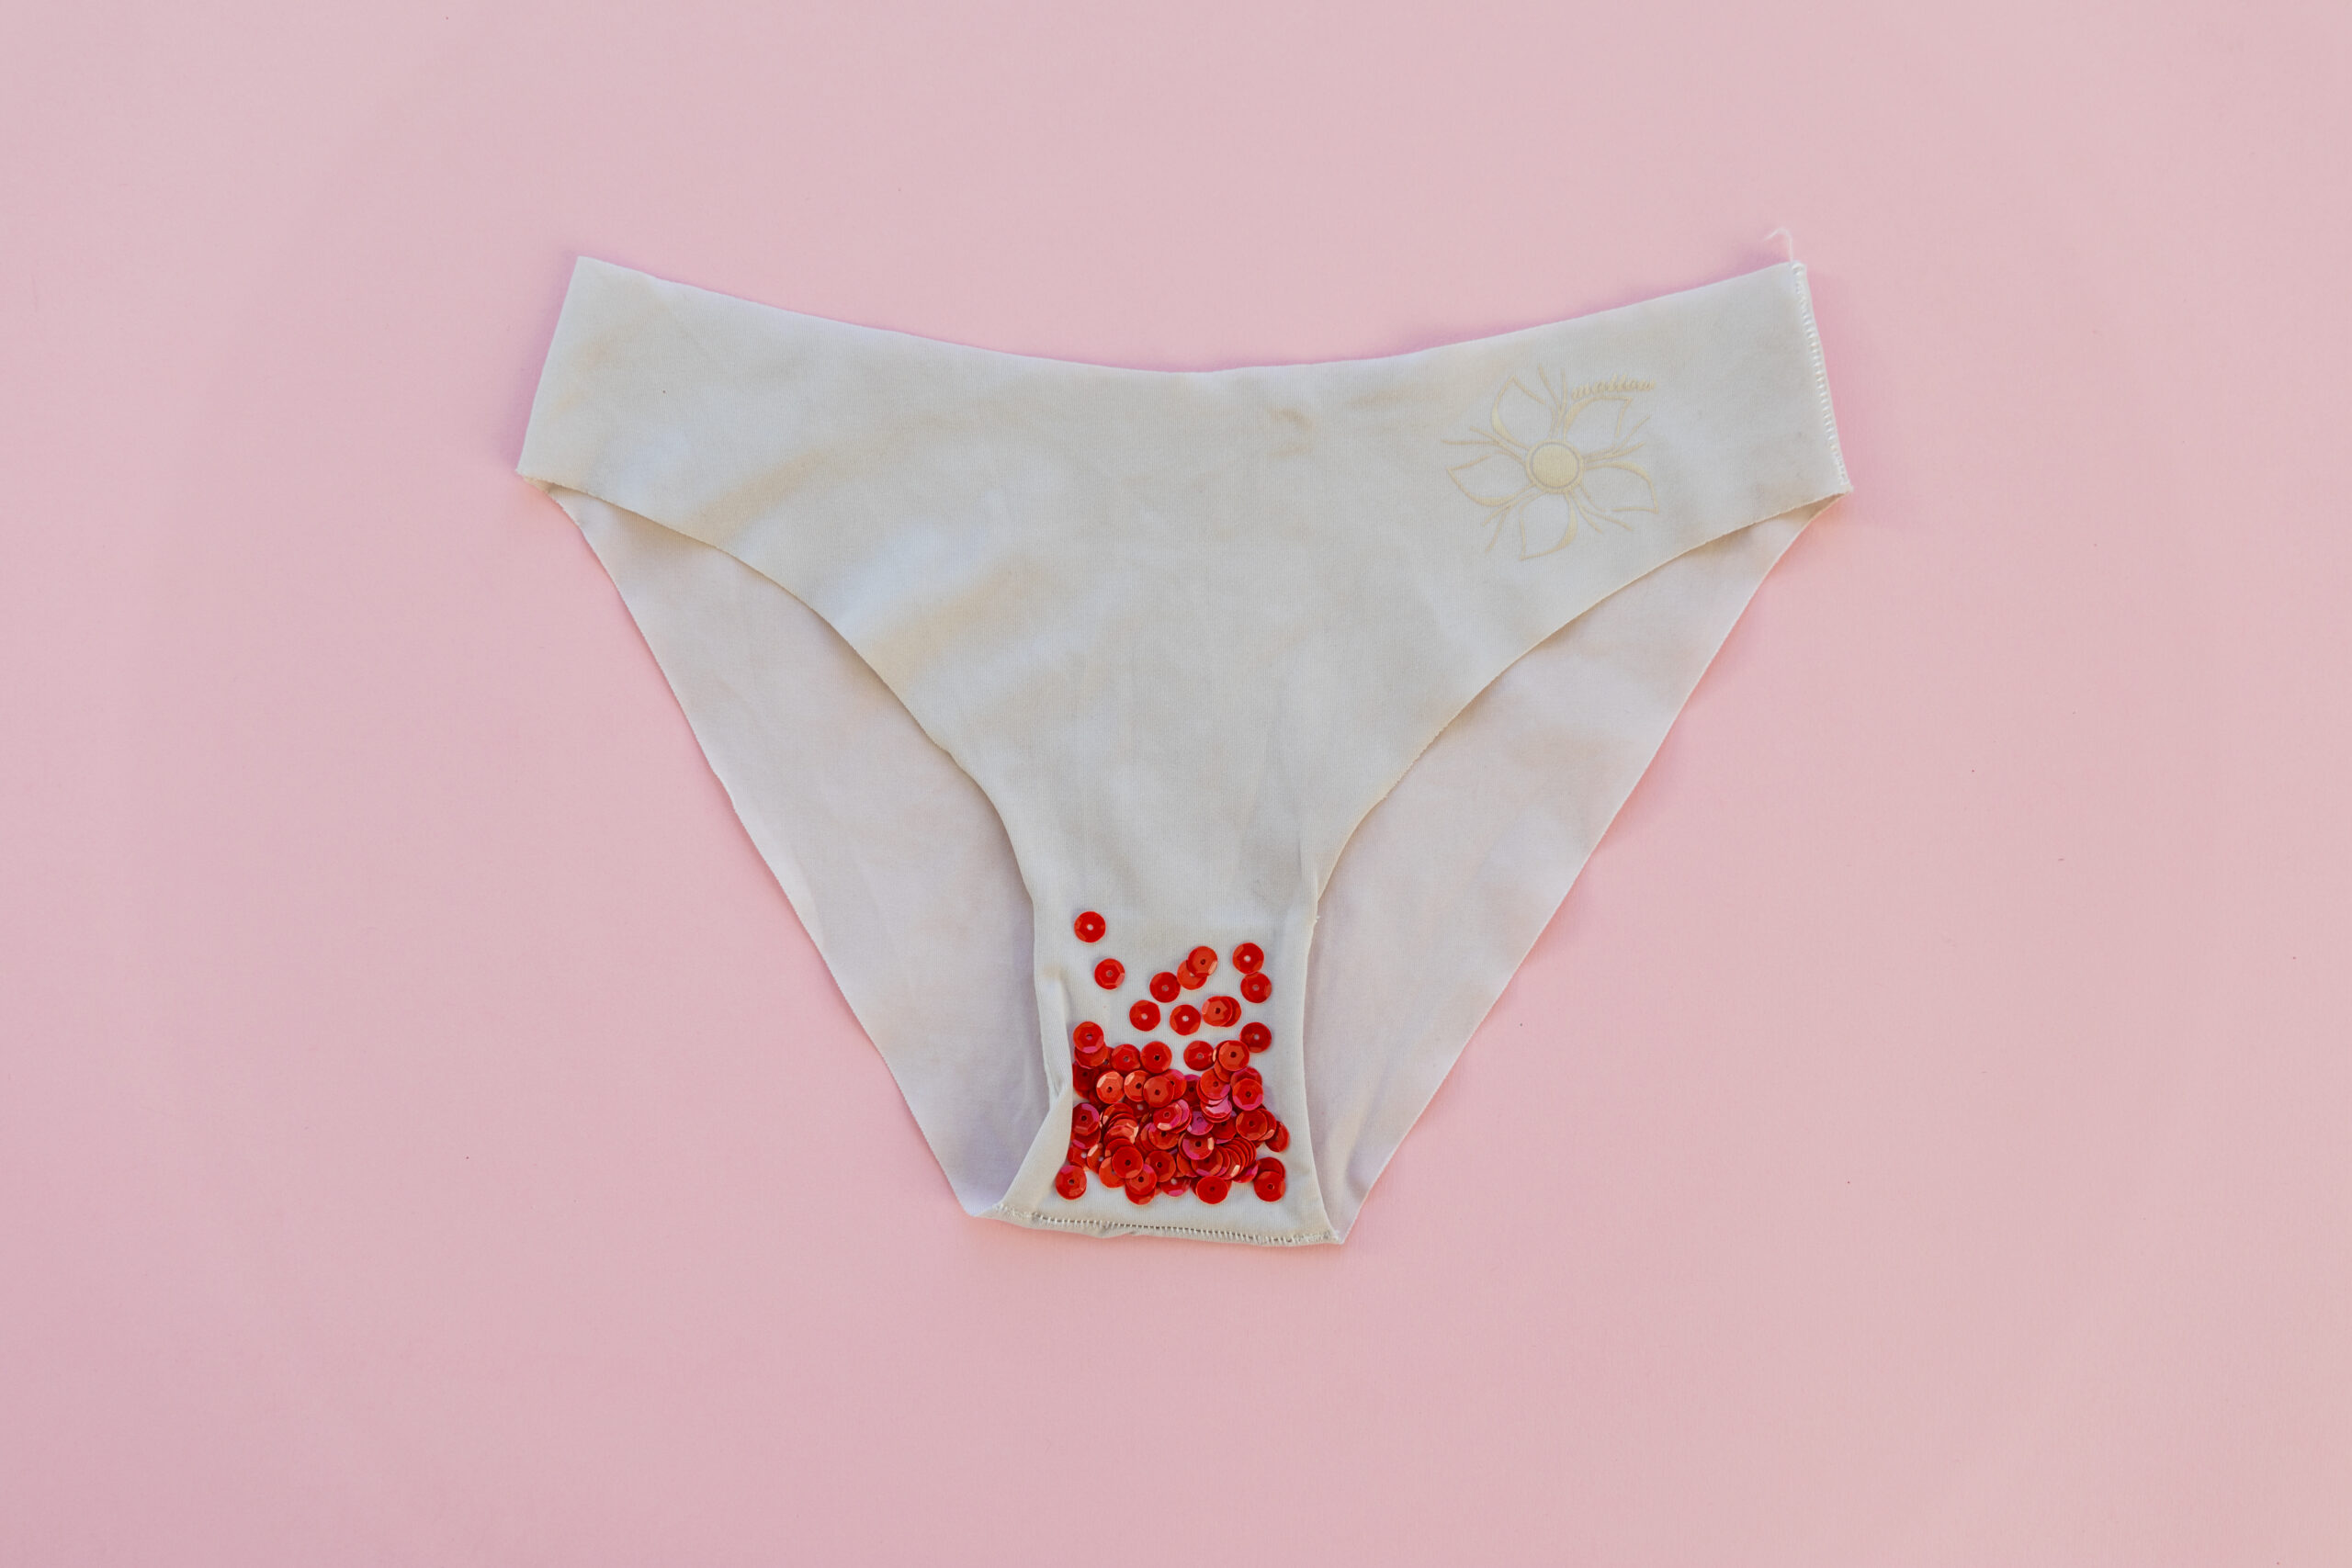 Grab The Meic: Have I Started My Period?